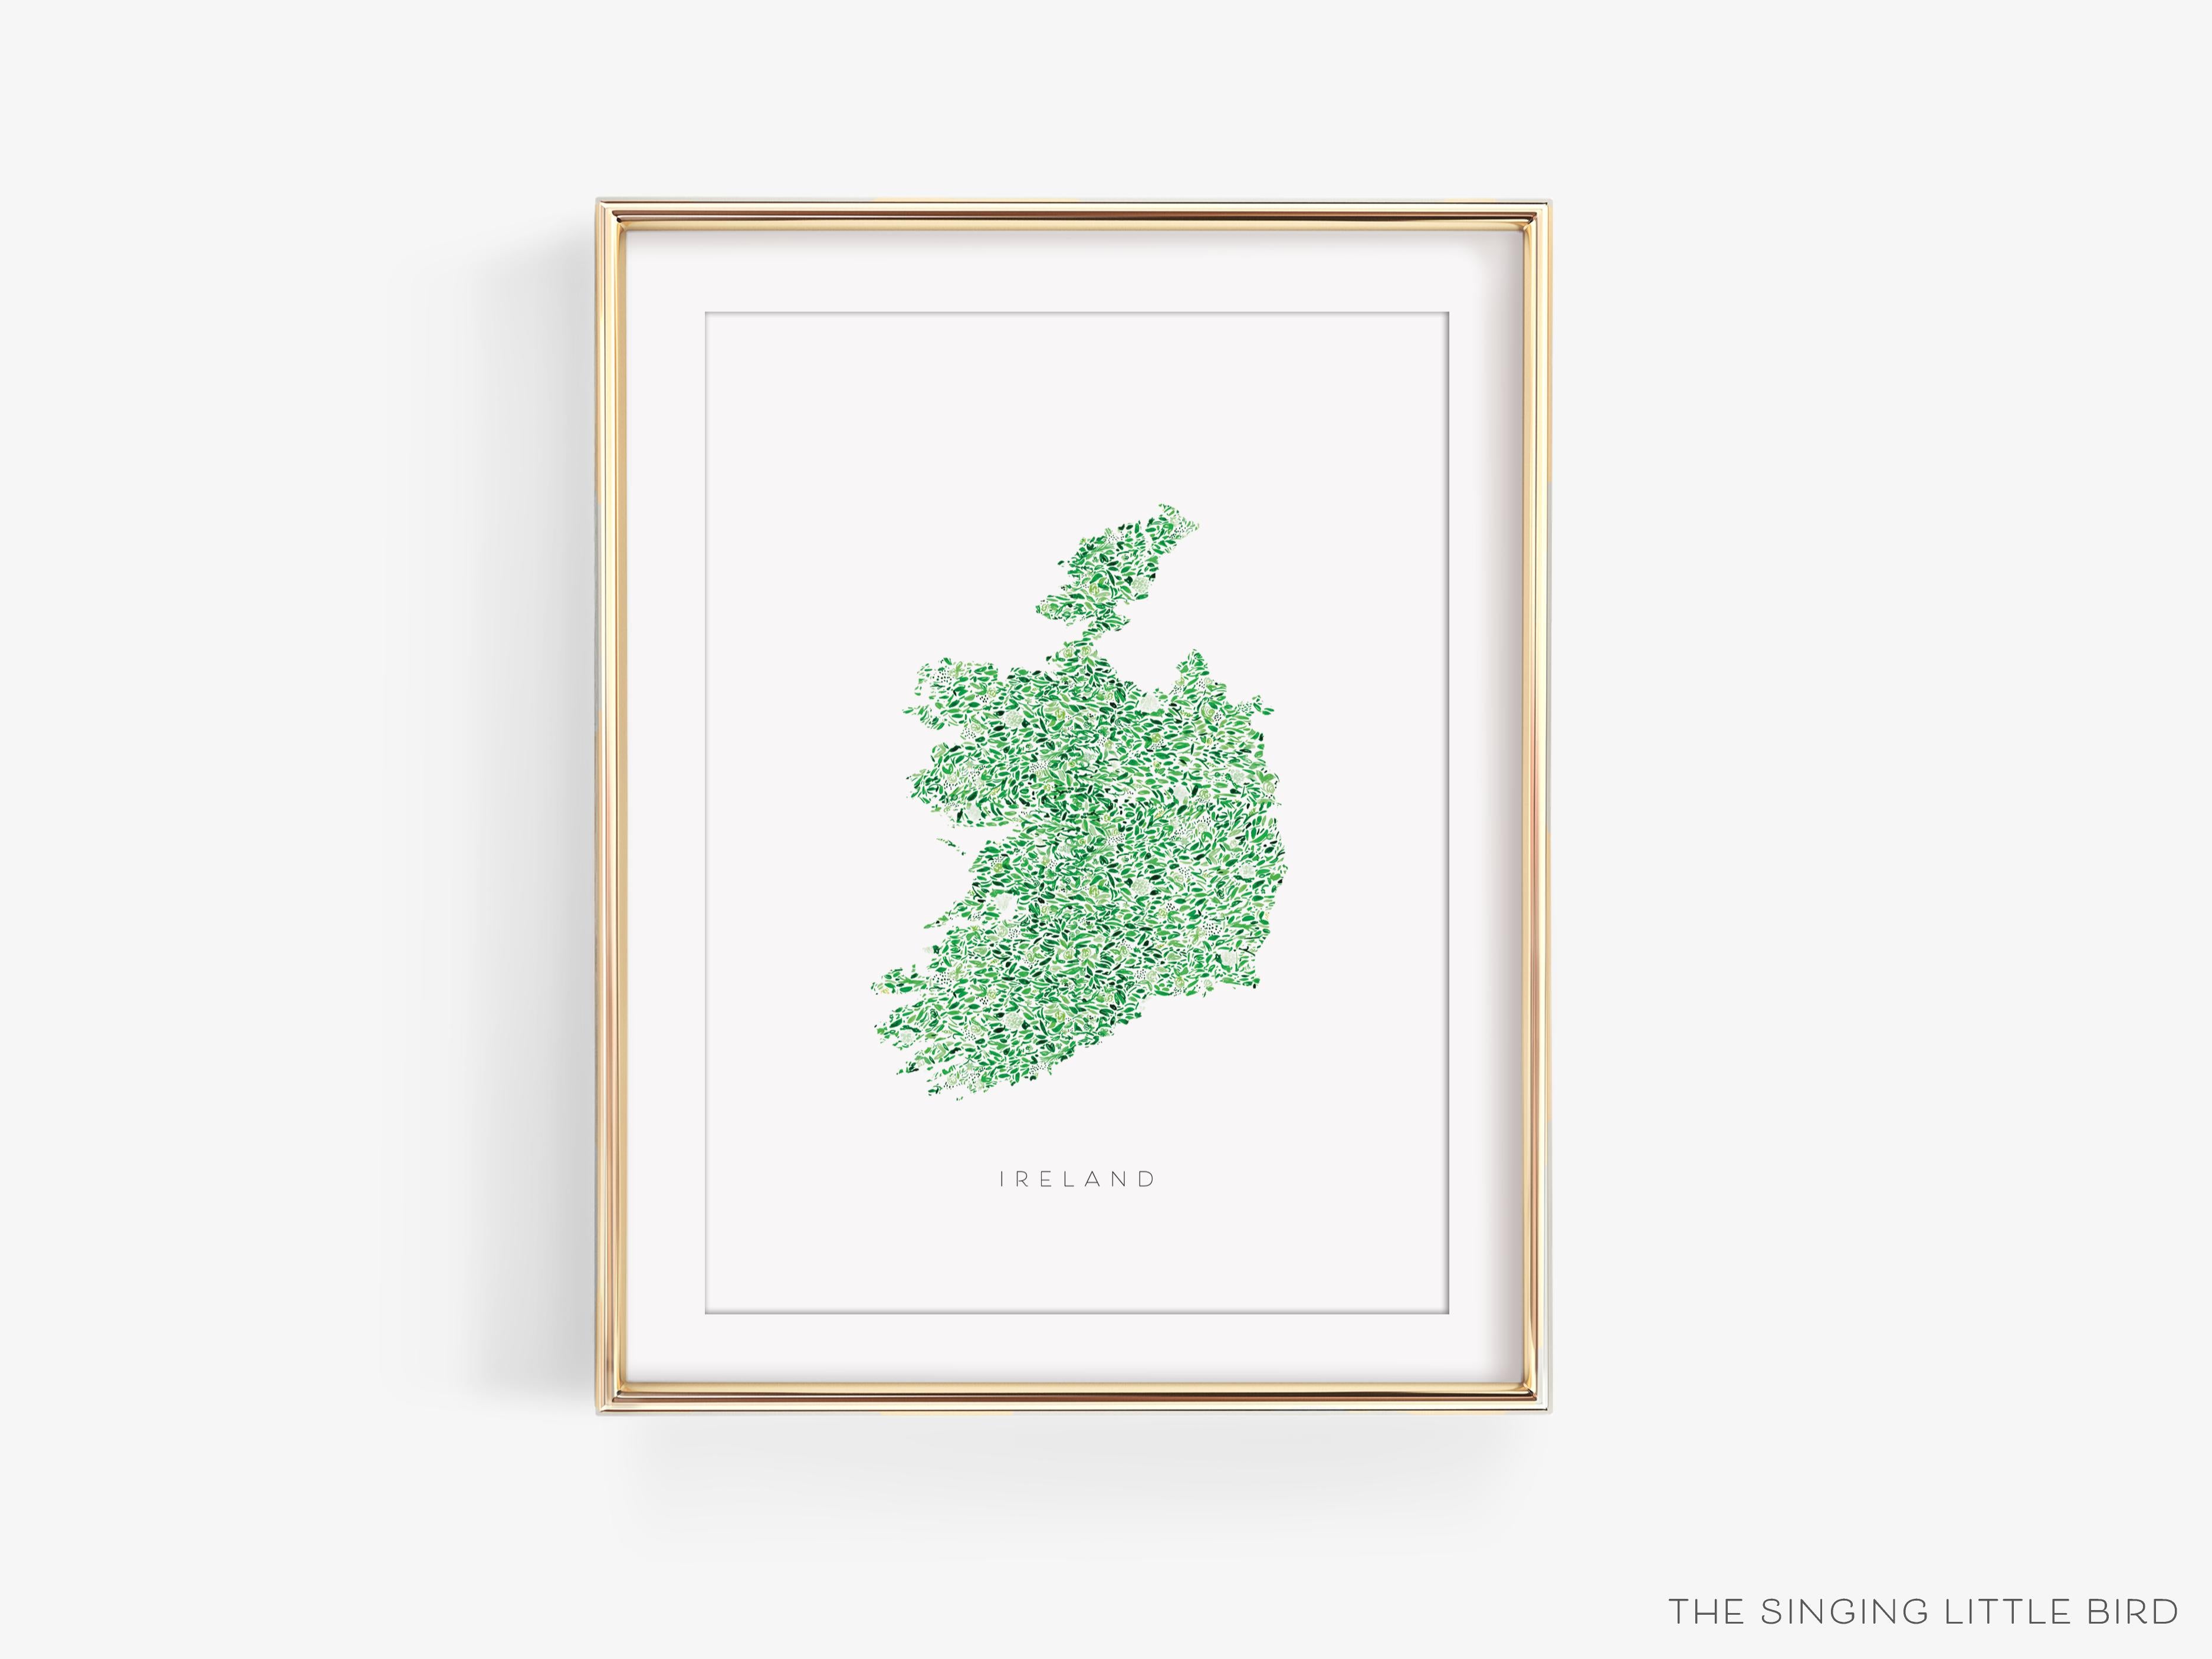 Ireland Art Print with Text-This watercolor art print features our hand-painted floral pattern in the shape of Ireland, printed in the USA on 120lb high quality art paper. This makes a great gift or wall decor for the Irish lover in your life.-The Singing Little Bird